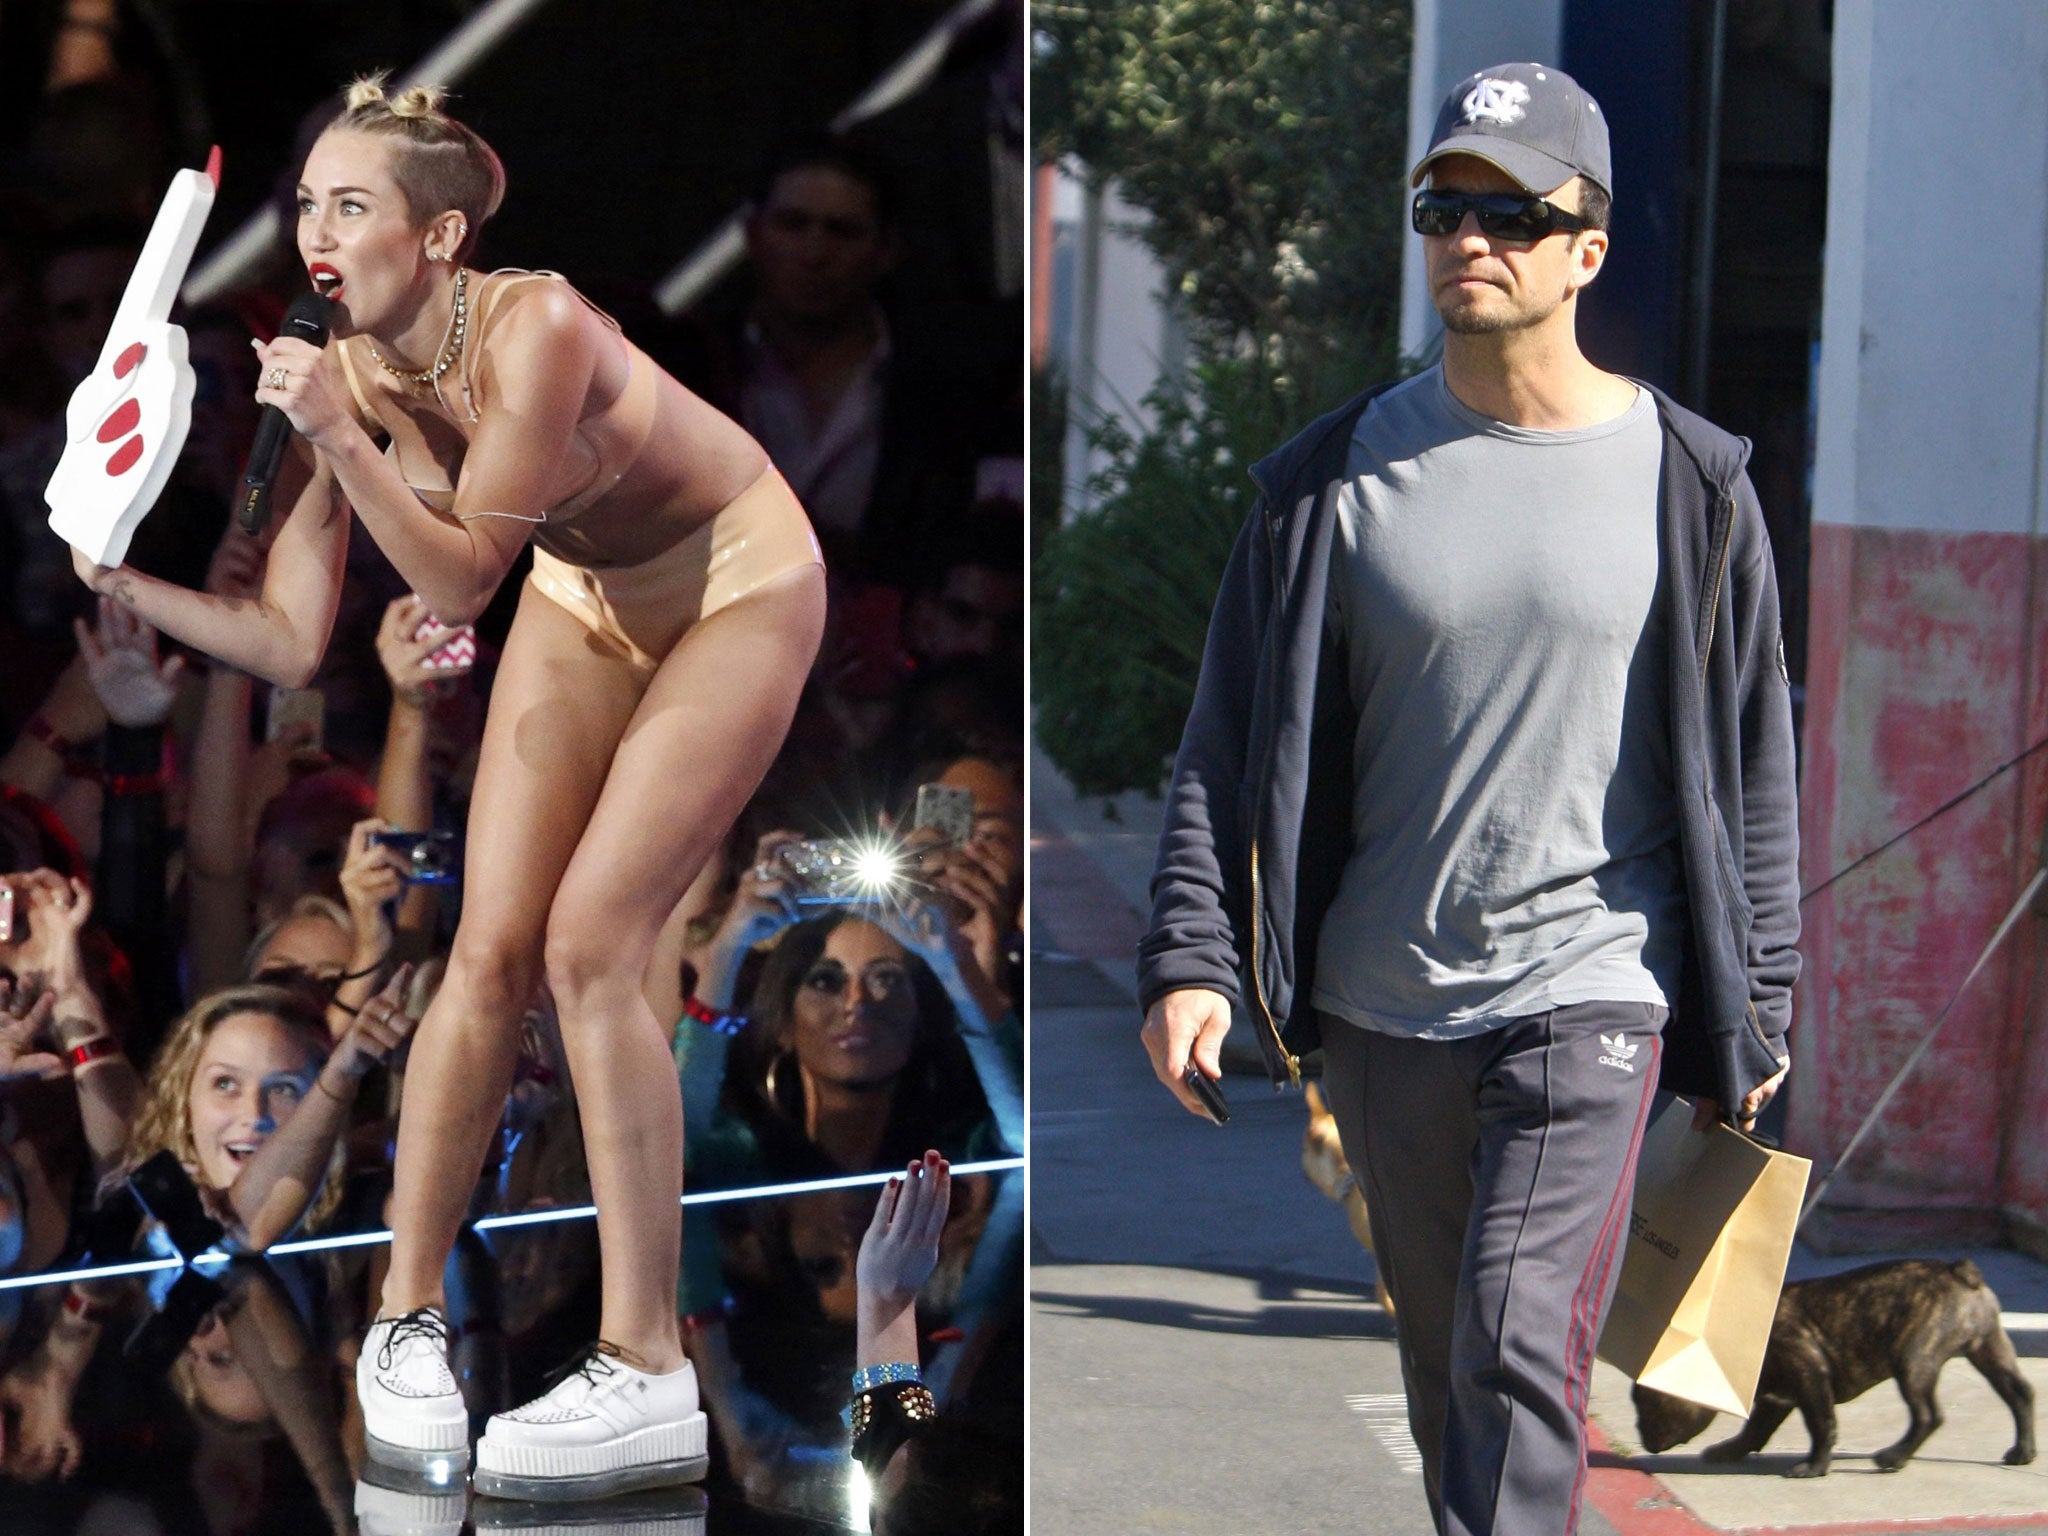 Larry Rudolph says Miley Cyrus made her own decision to 'twerk' at the VMA Awards